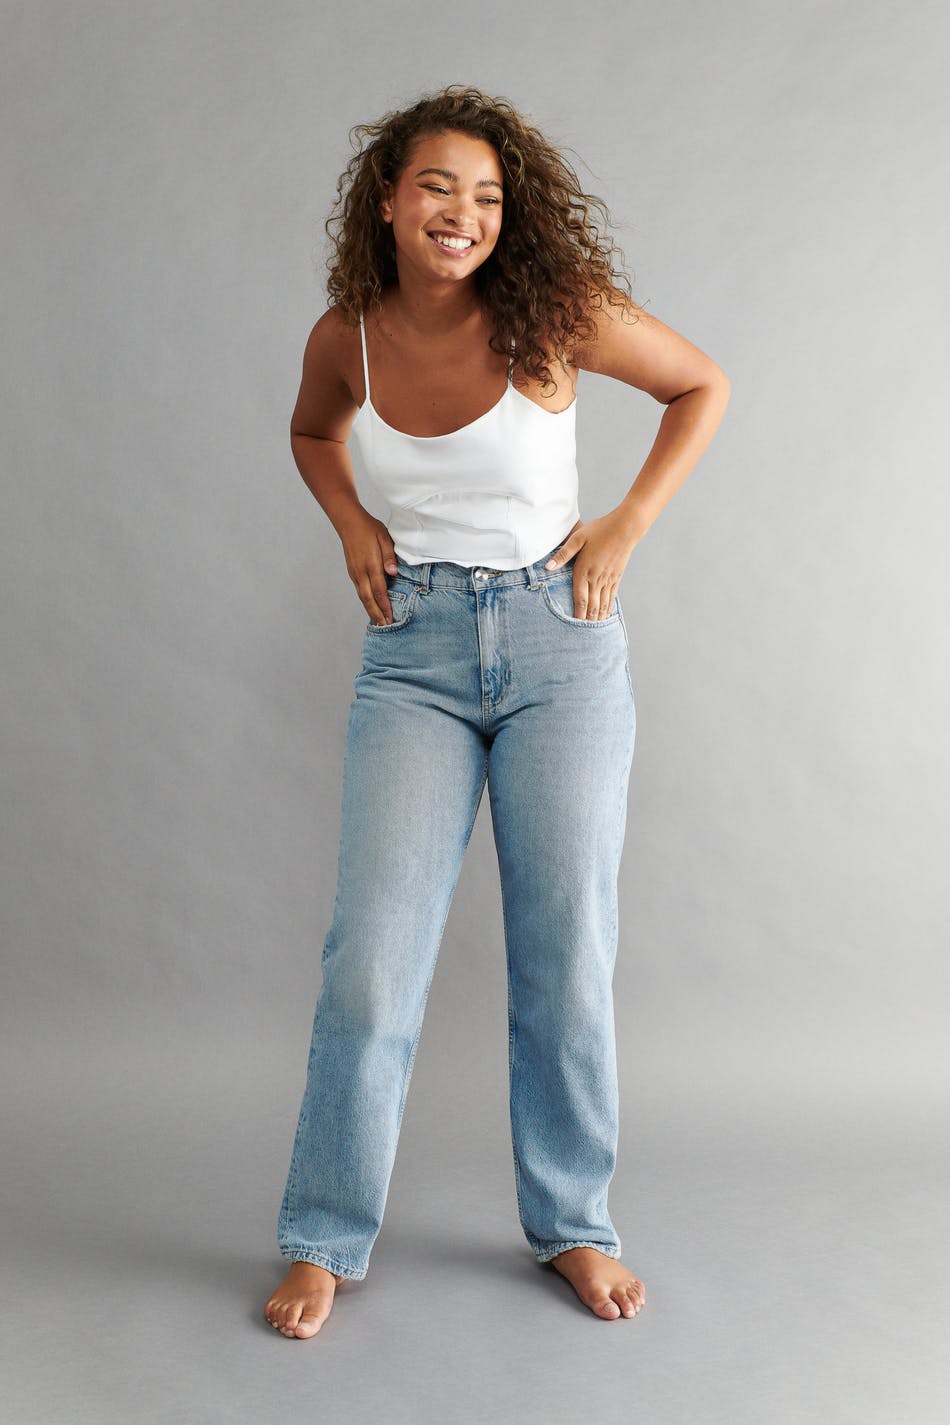 Udlevering Alabama fritid 90s high waist jeans - Gina Tricot